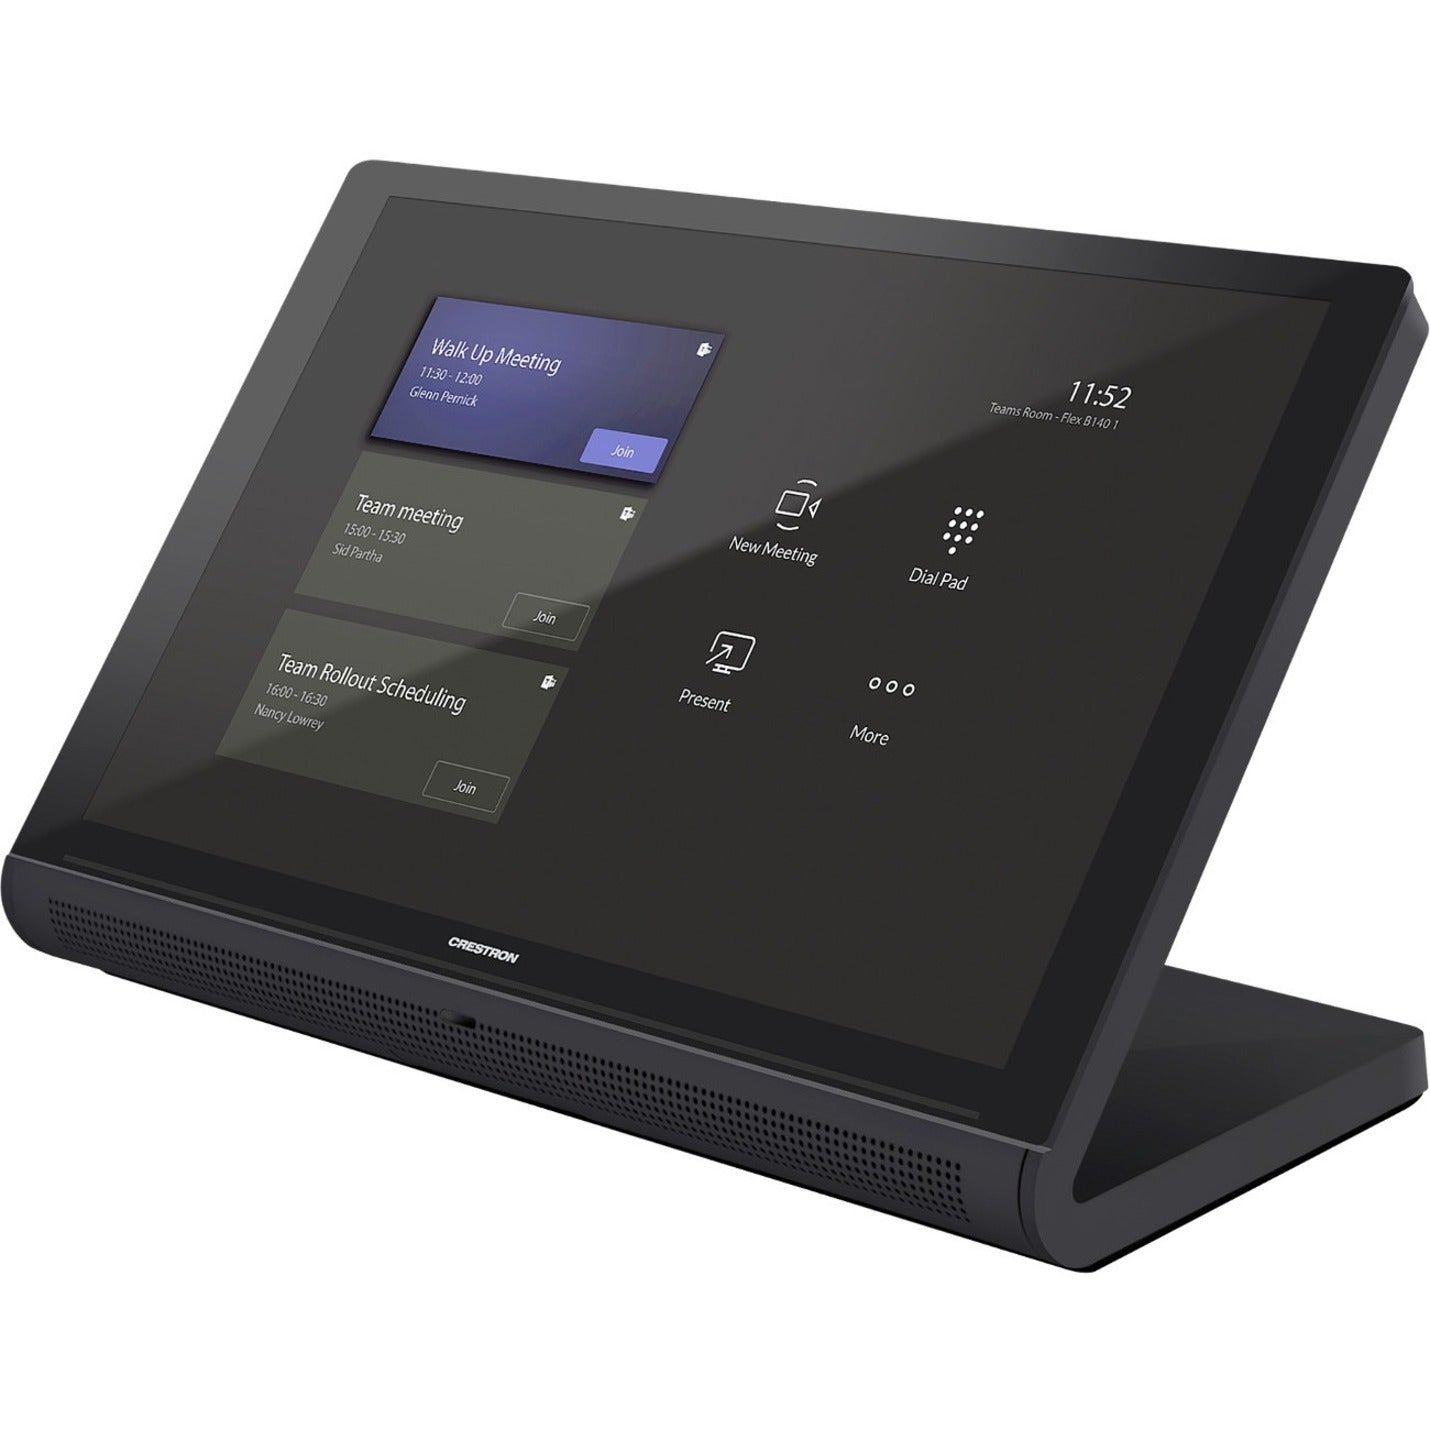 Crestron UC-CX100-T Video Conference System Integrator Kit 6511607, 10.1" Tabletop Touch Screen, Black Smooth